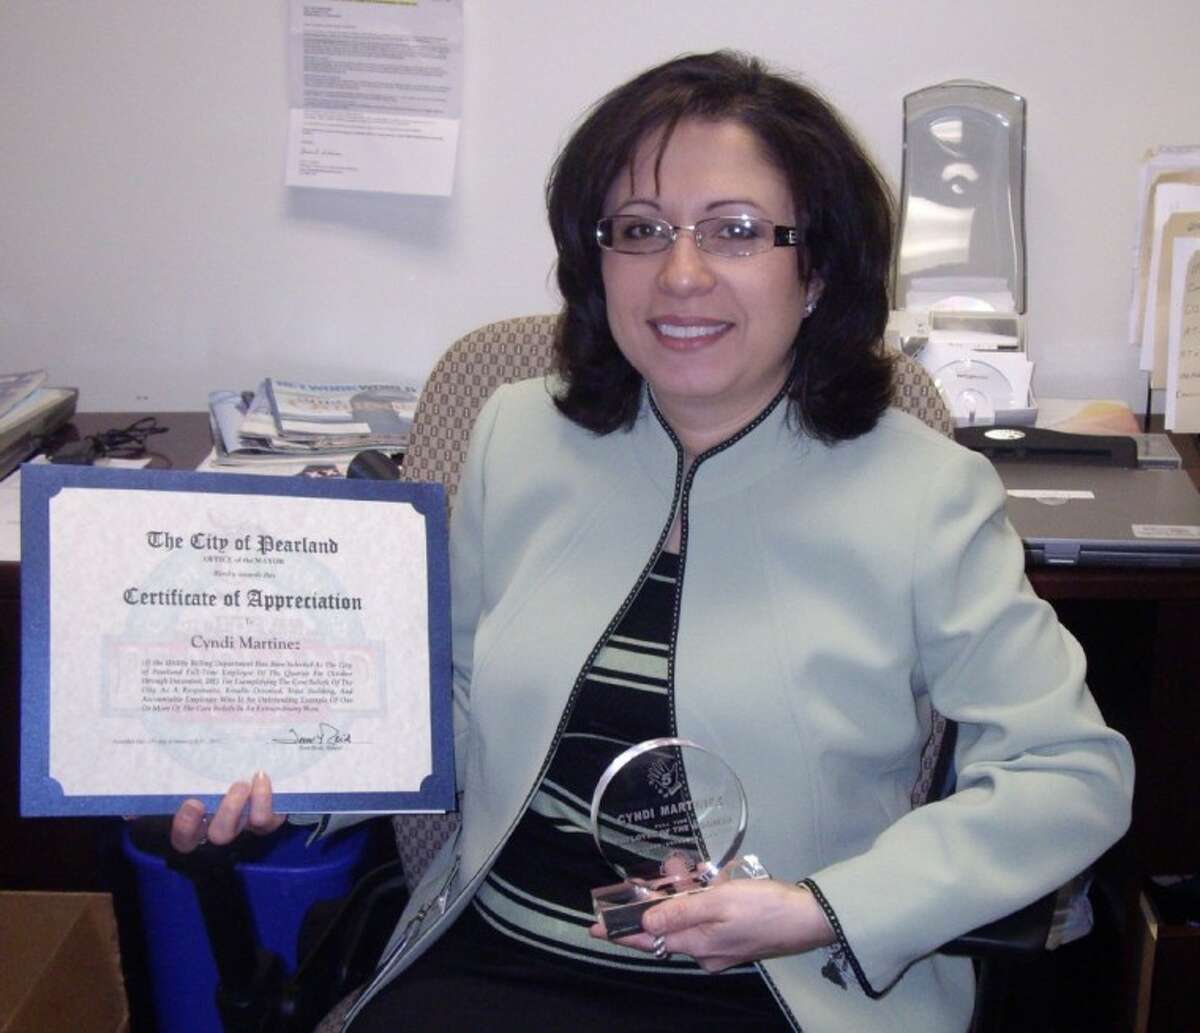 Cyndi Martinez was honored recently as the City of Pearland Employee of the Quarter.